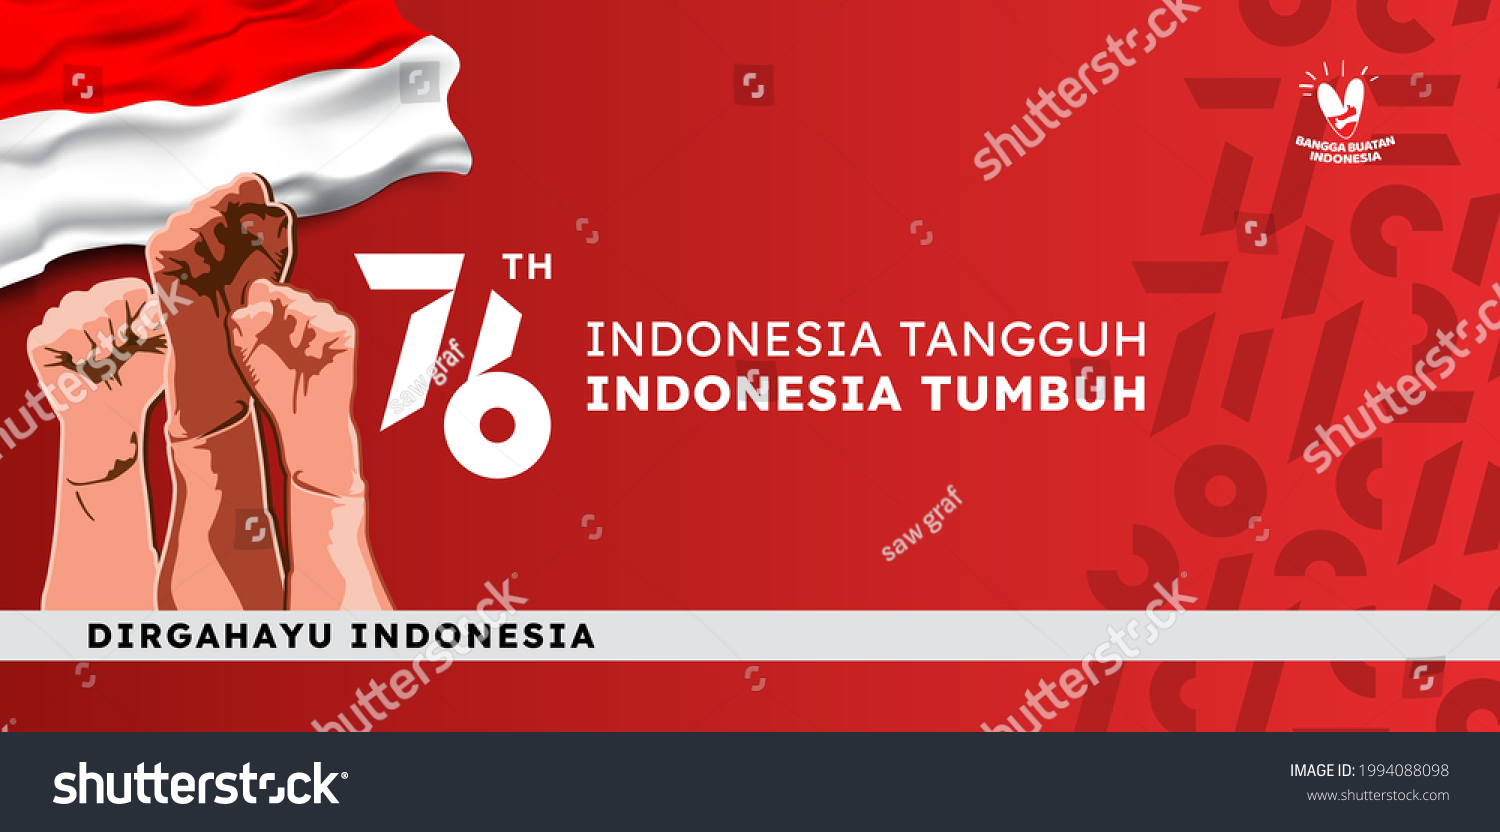 76th Indonesia National Day Logo Abstract Stock Vector Royalty Free 1994088098 Shutterstock 4780